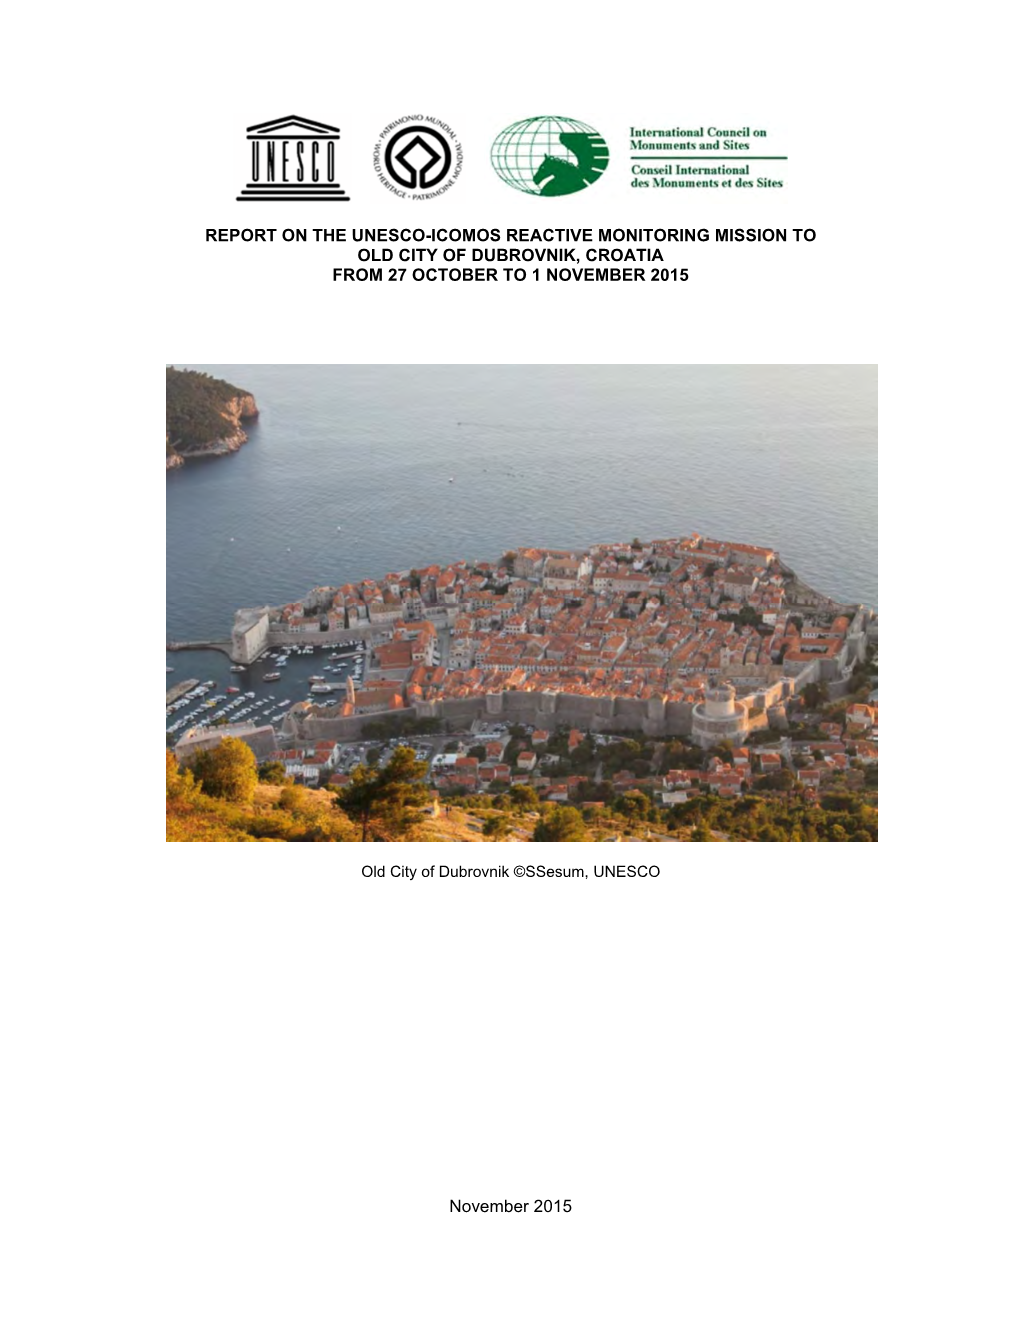 REPORT on the UNESCO-ICOMOS REACTIVE MONITORING MISSION to OLD CITY of DUBROVNIK, CROATIA from 27 OCTOBER to 1 NOVEMBER 2015 No